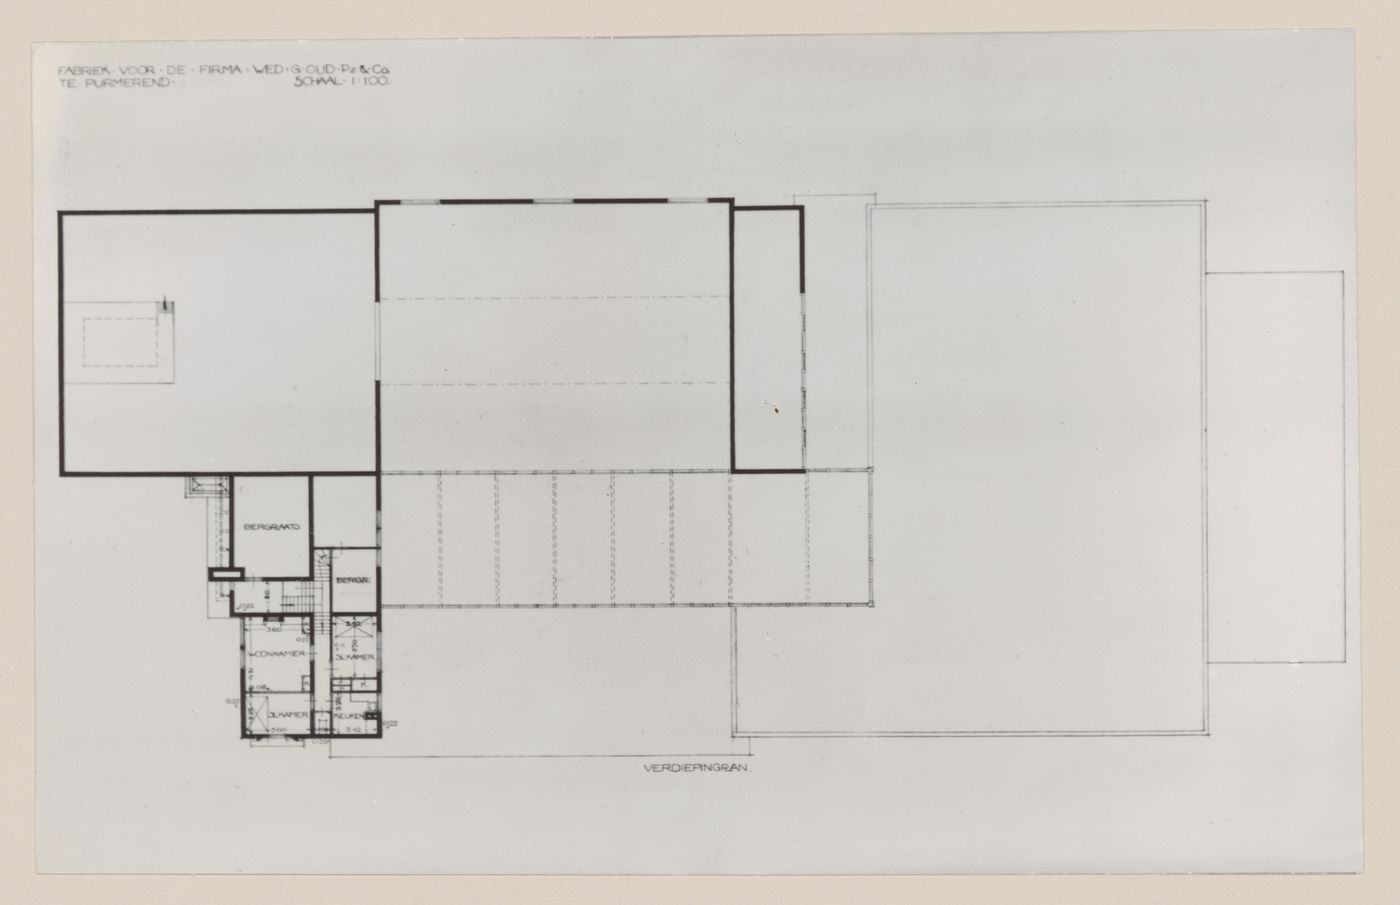 Photograph of floor plans for a winery, Purmerend, Netherlands